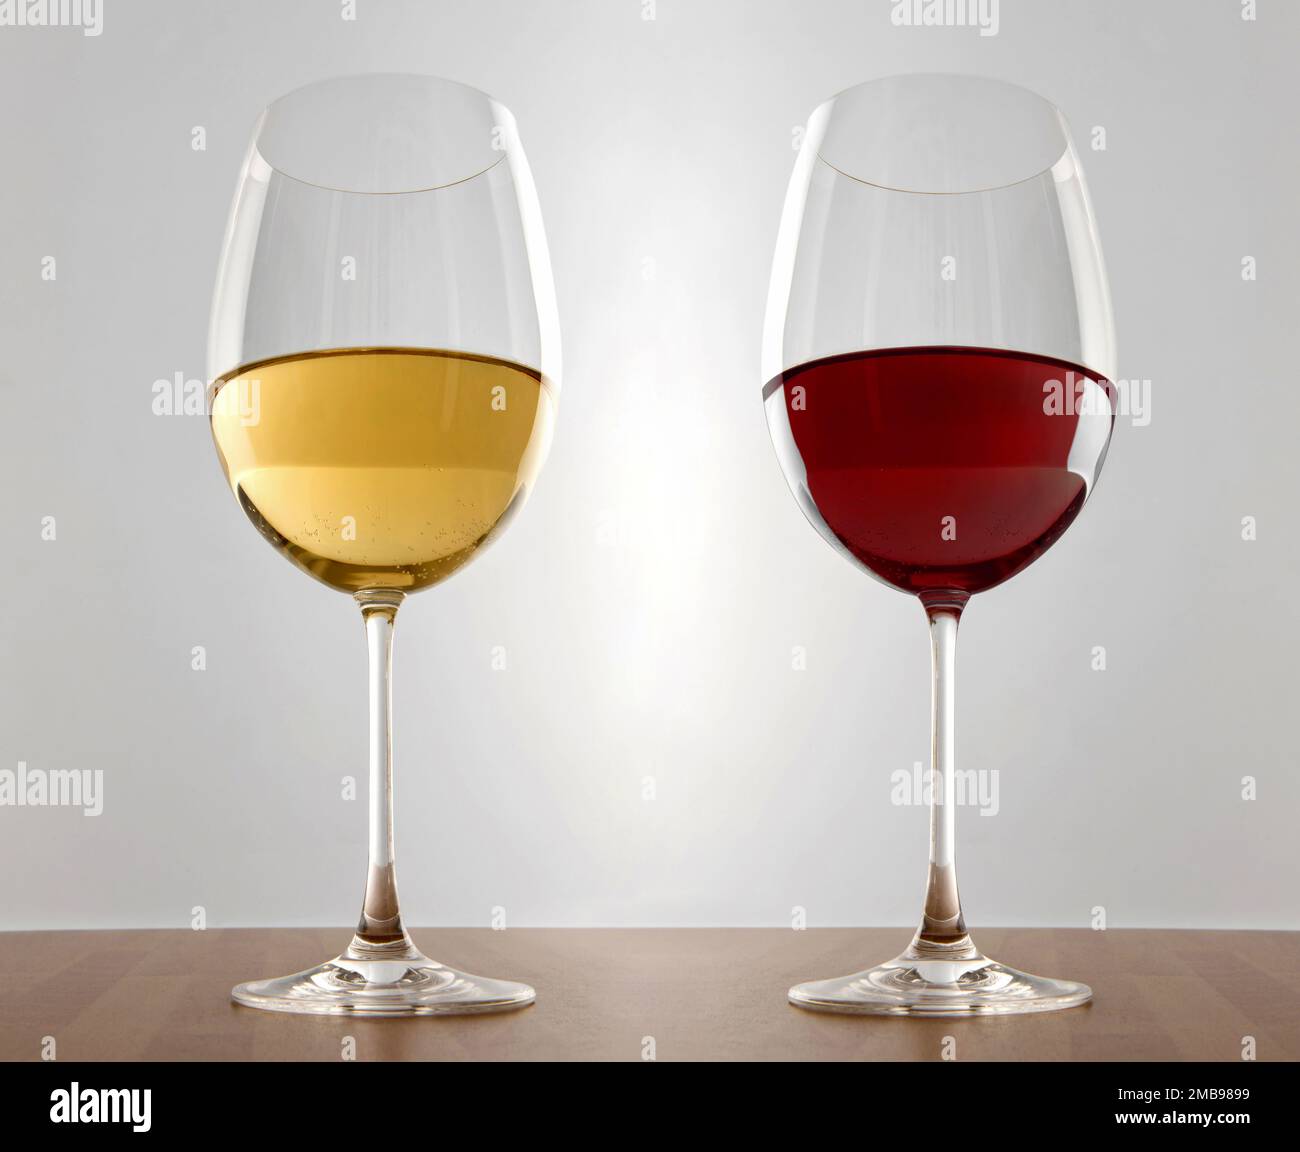 Glasses of white and red wine placed on wooden desk against gray background Stock Photo